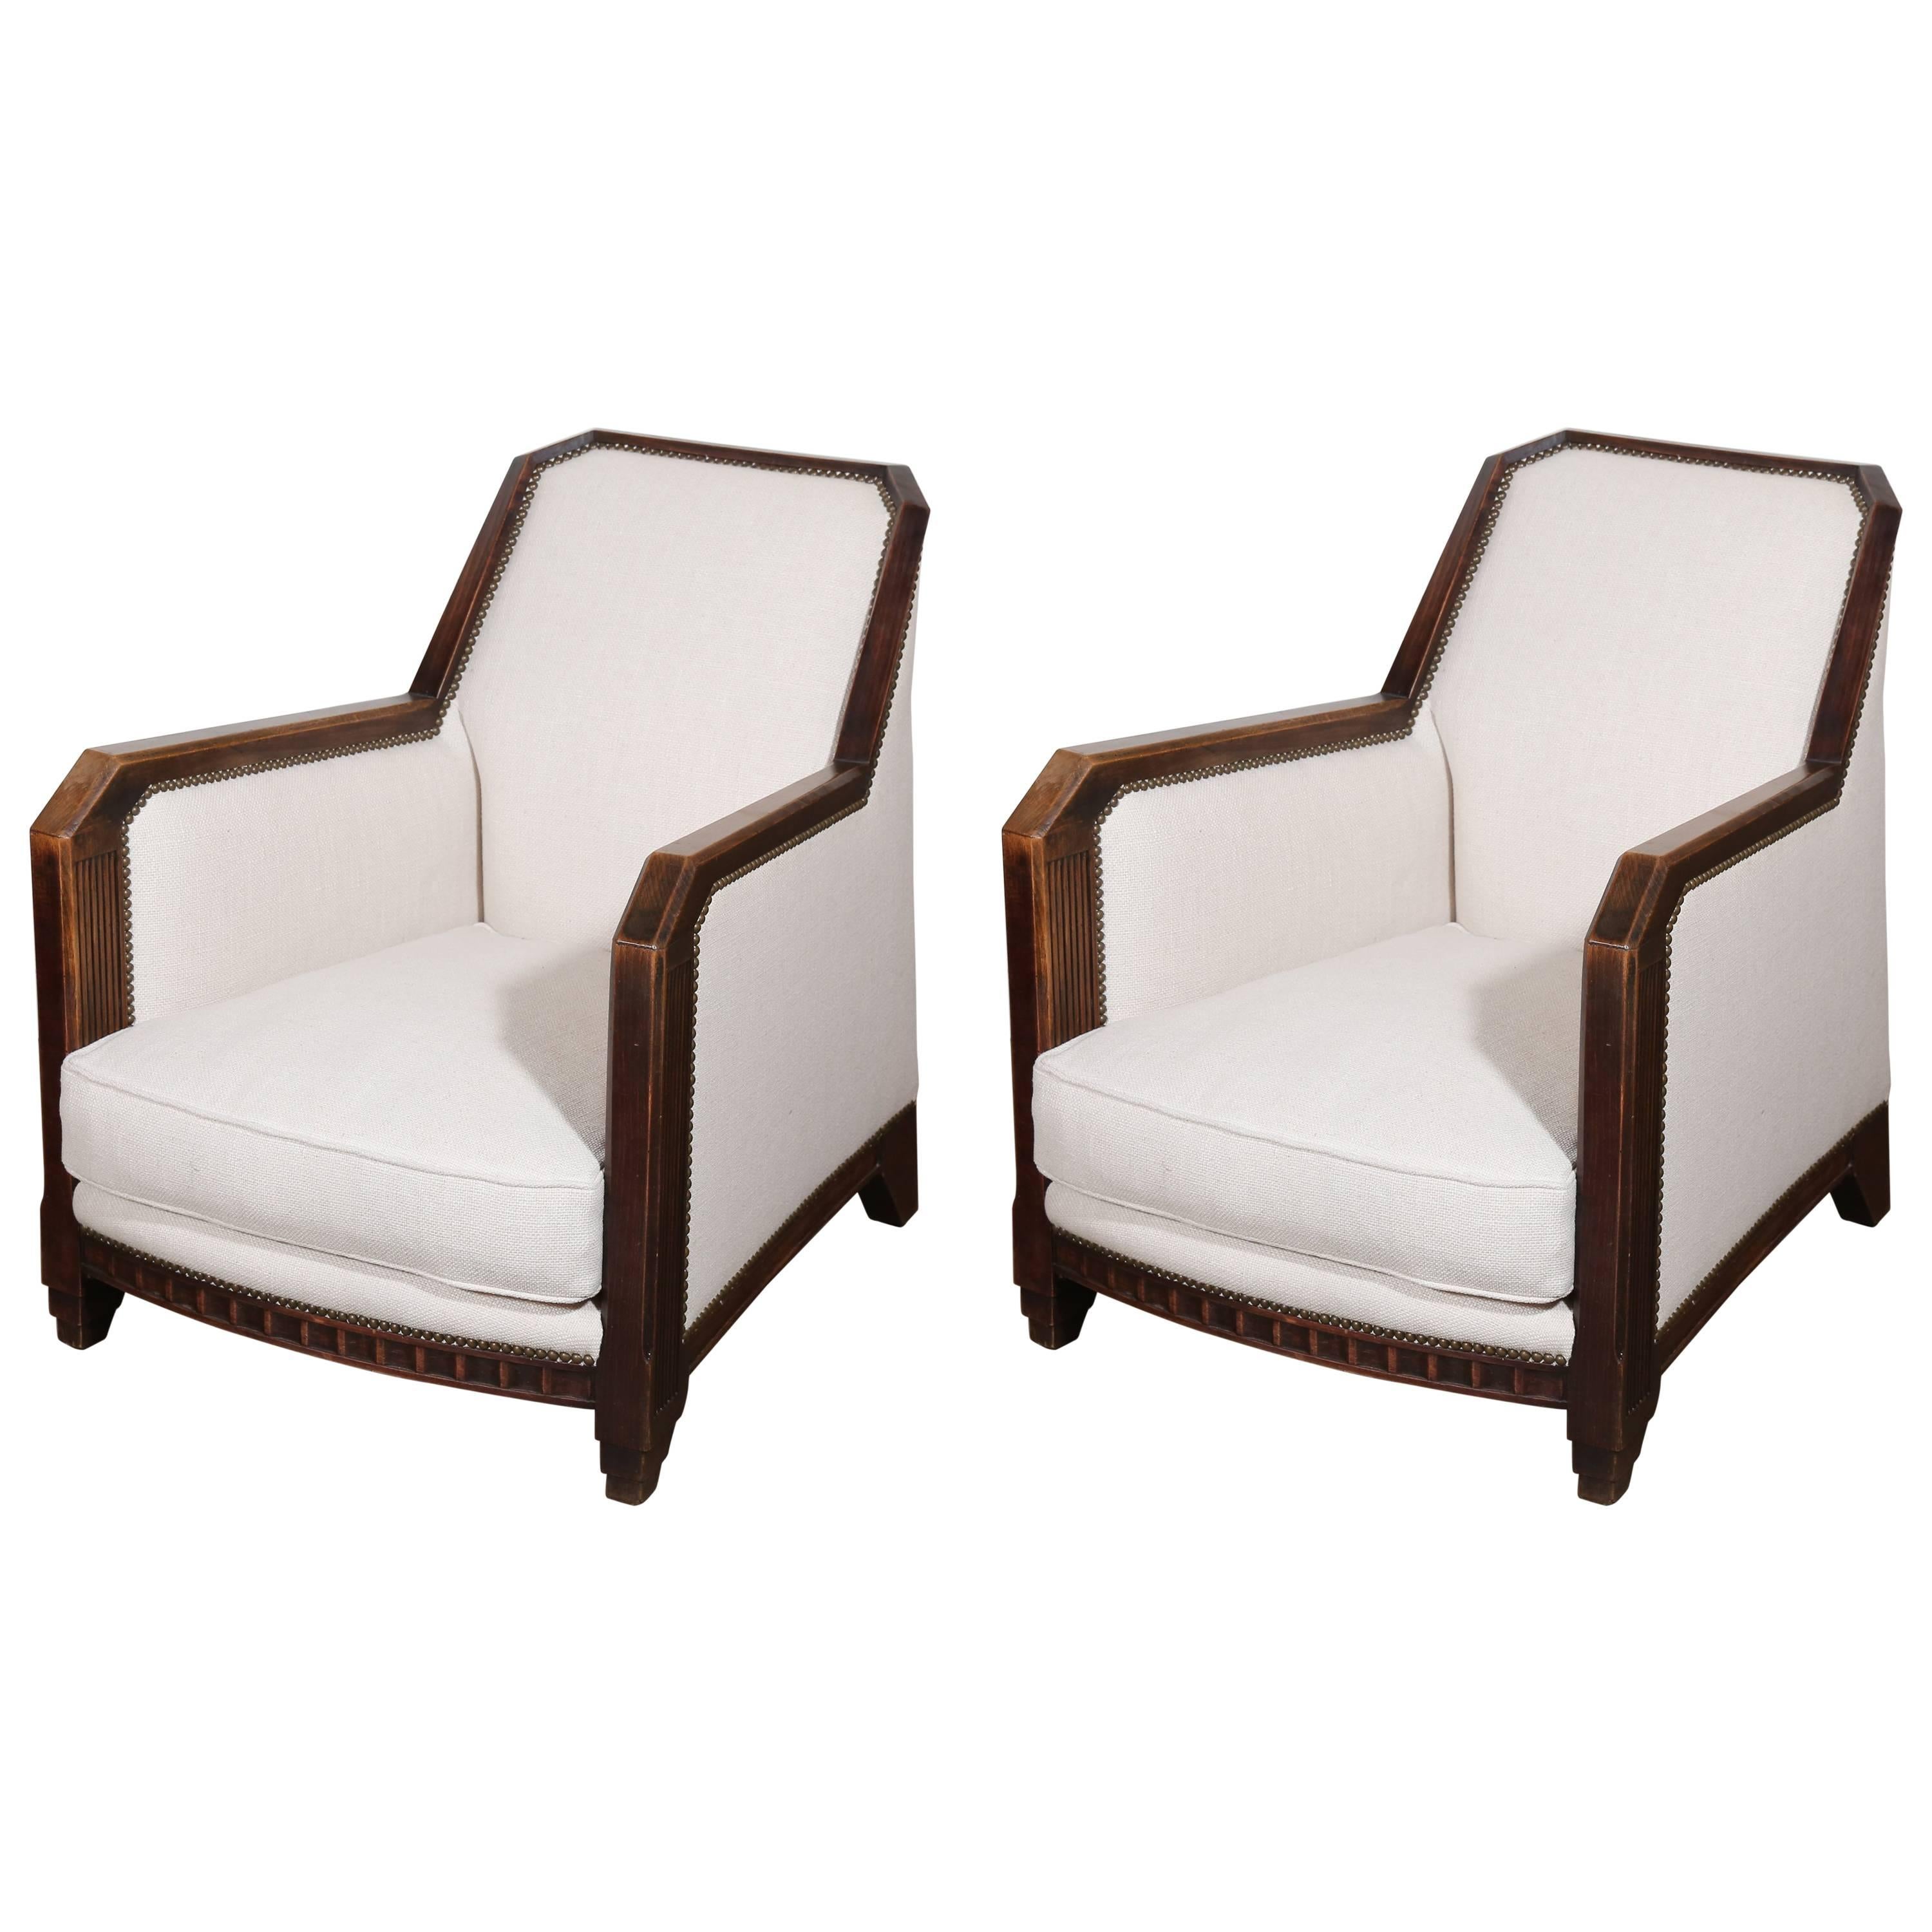 Pair of French Deco Club Chairs